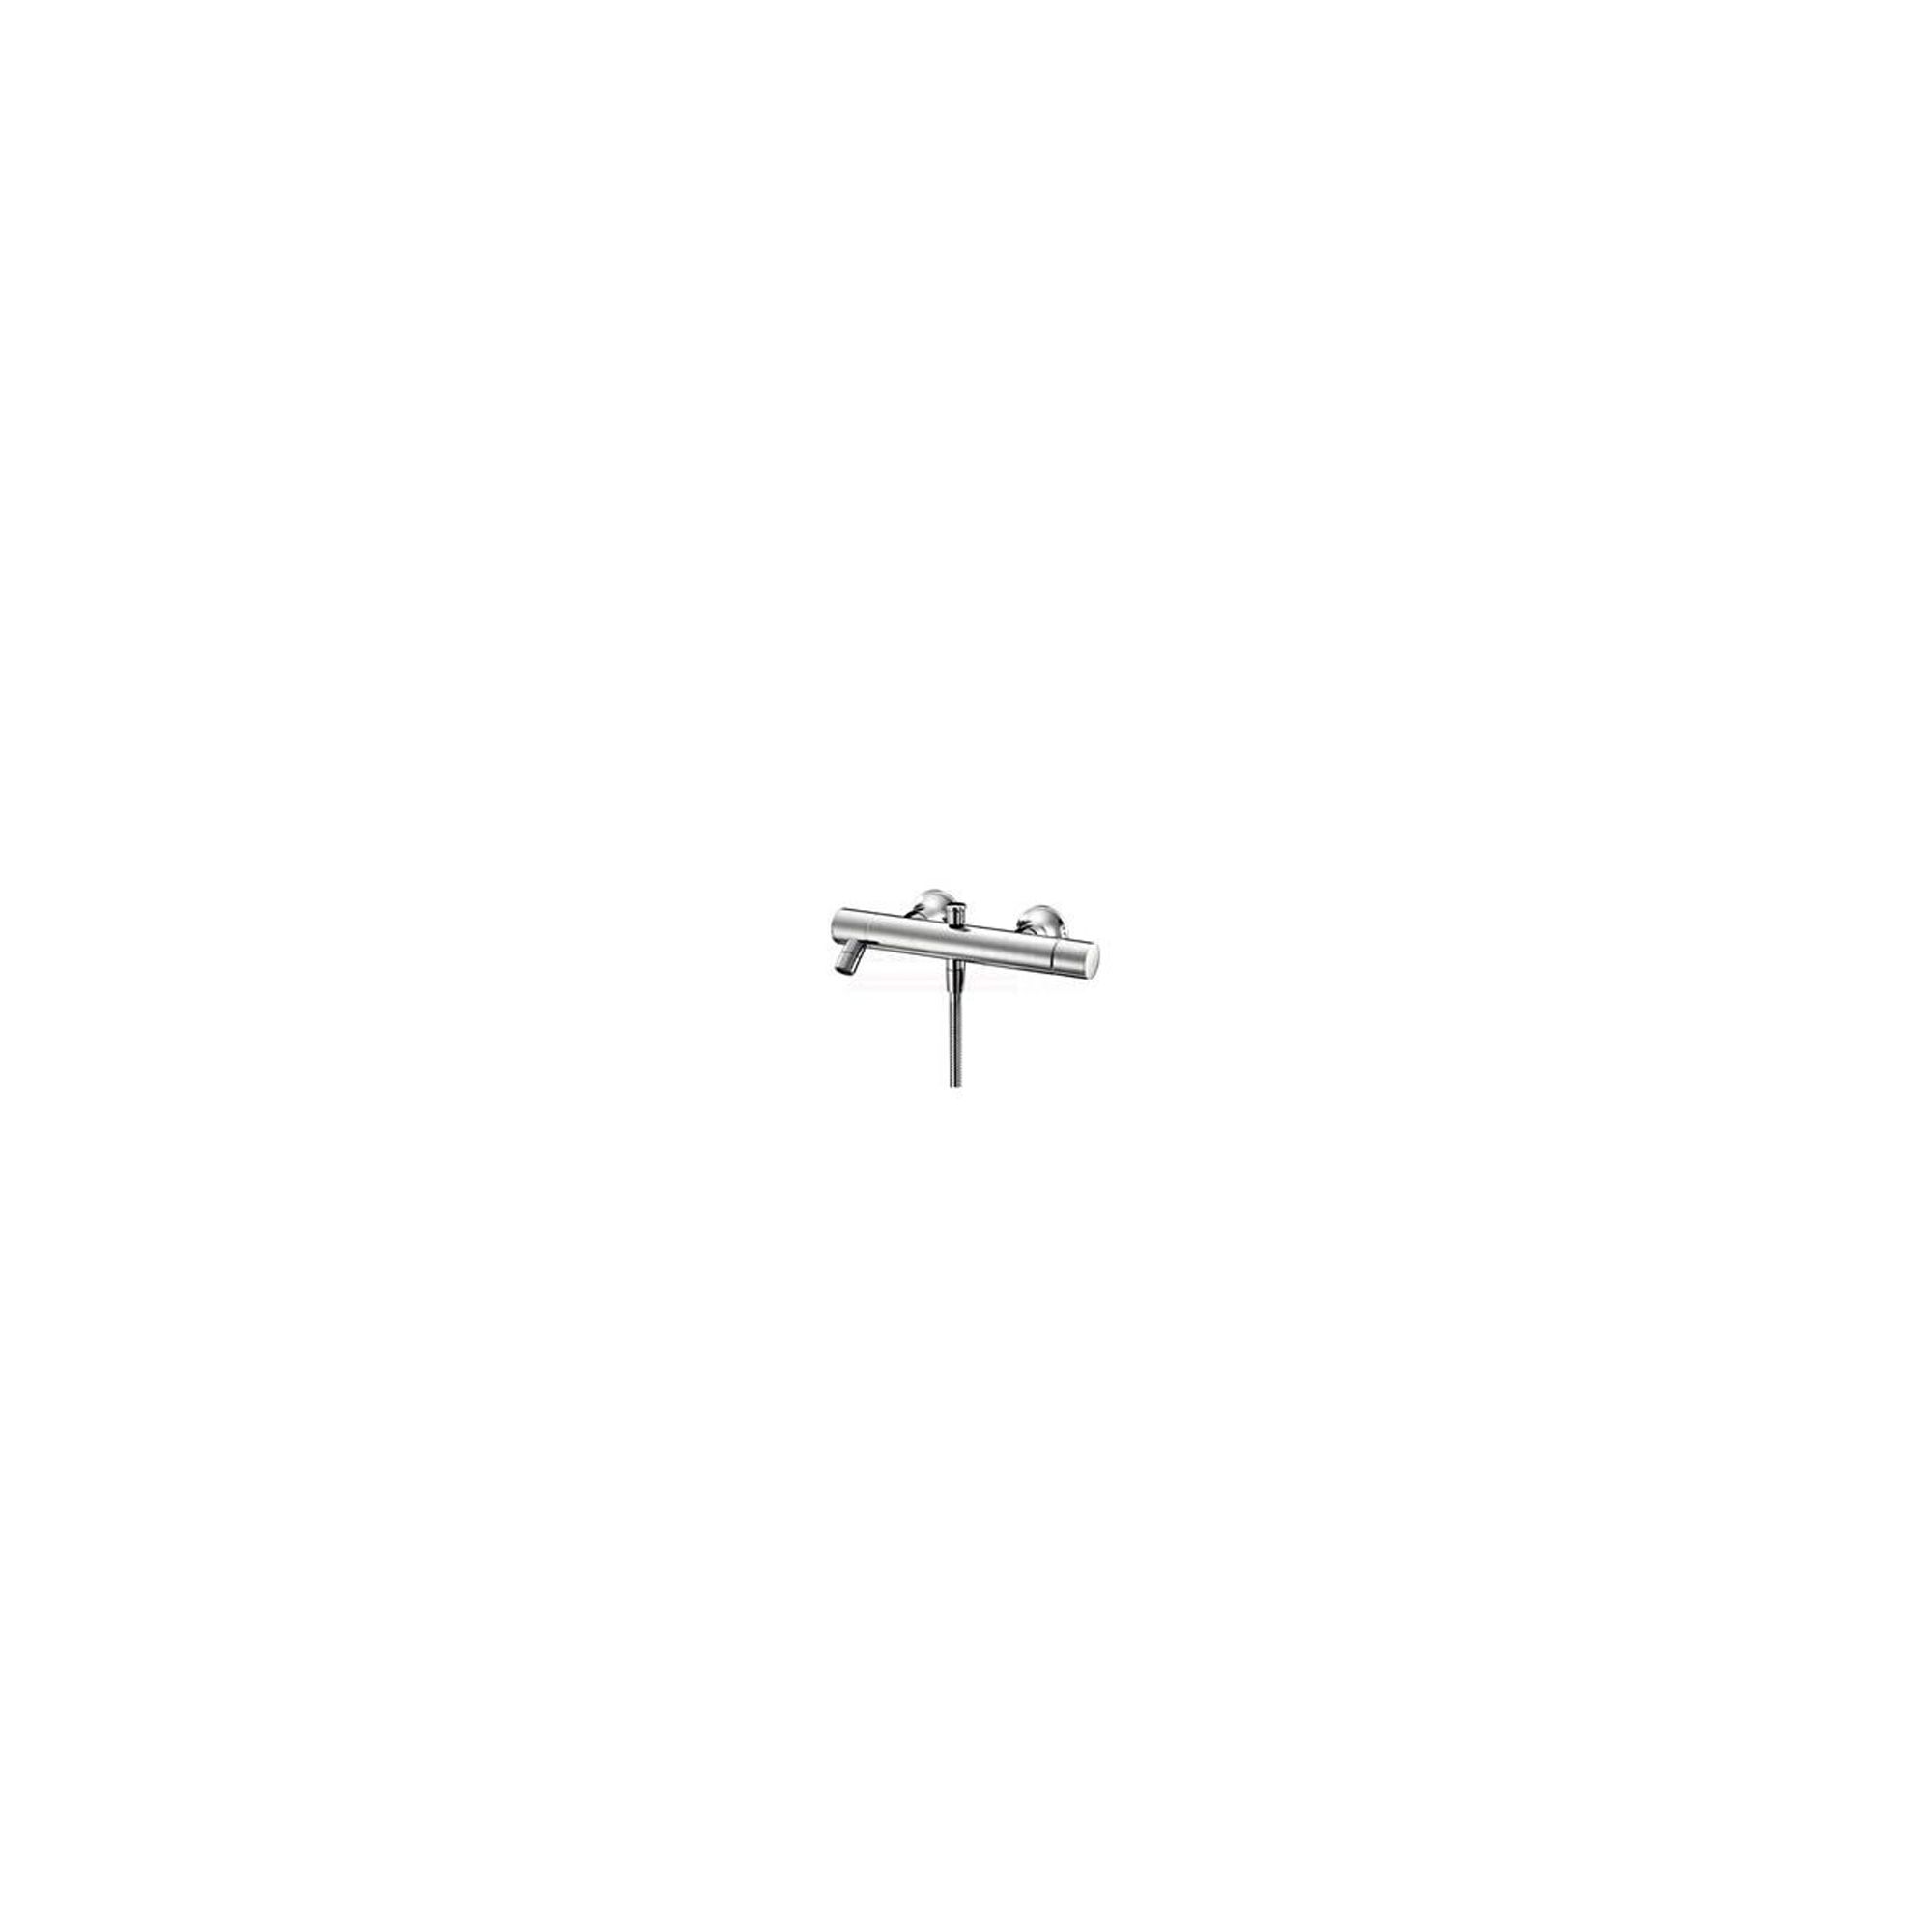 Ideal Standard Alfiere Exposed Bath Shower Mixer Tap Chrome at Tescos Direct